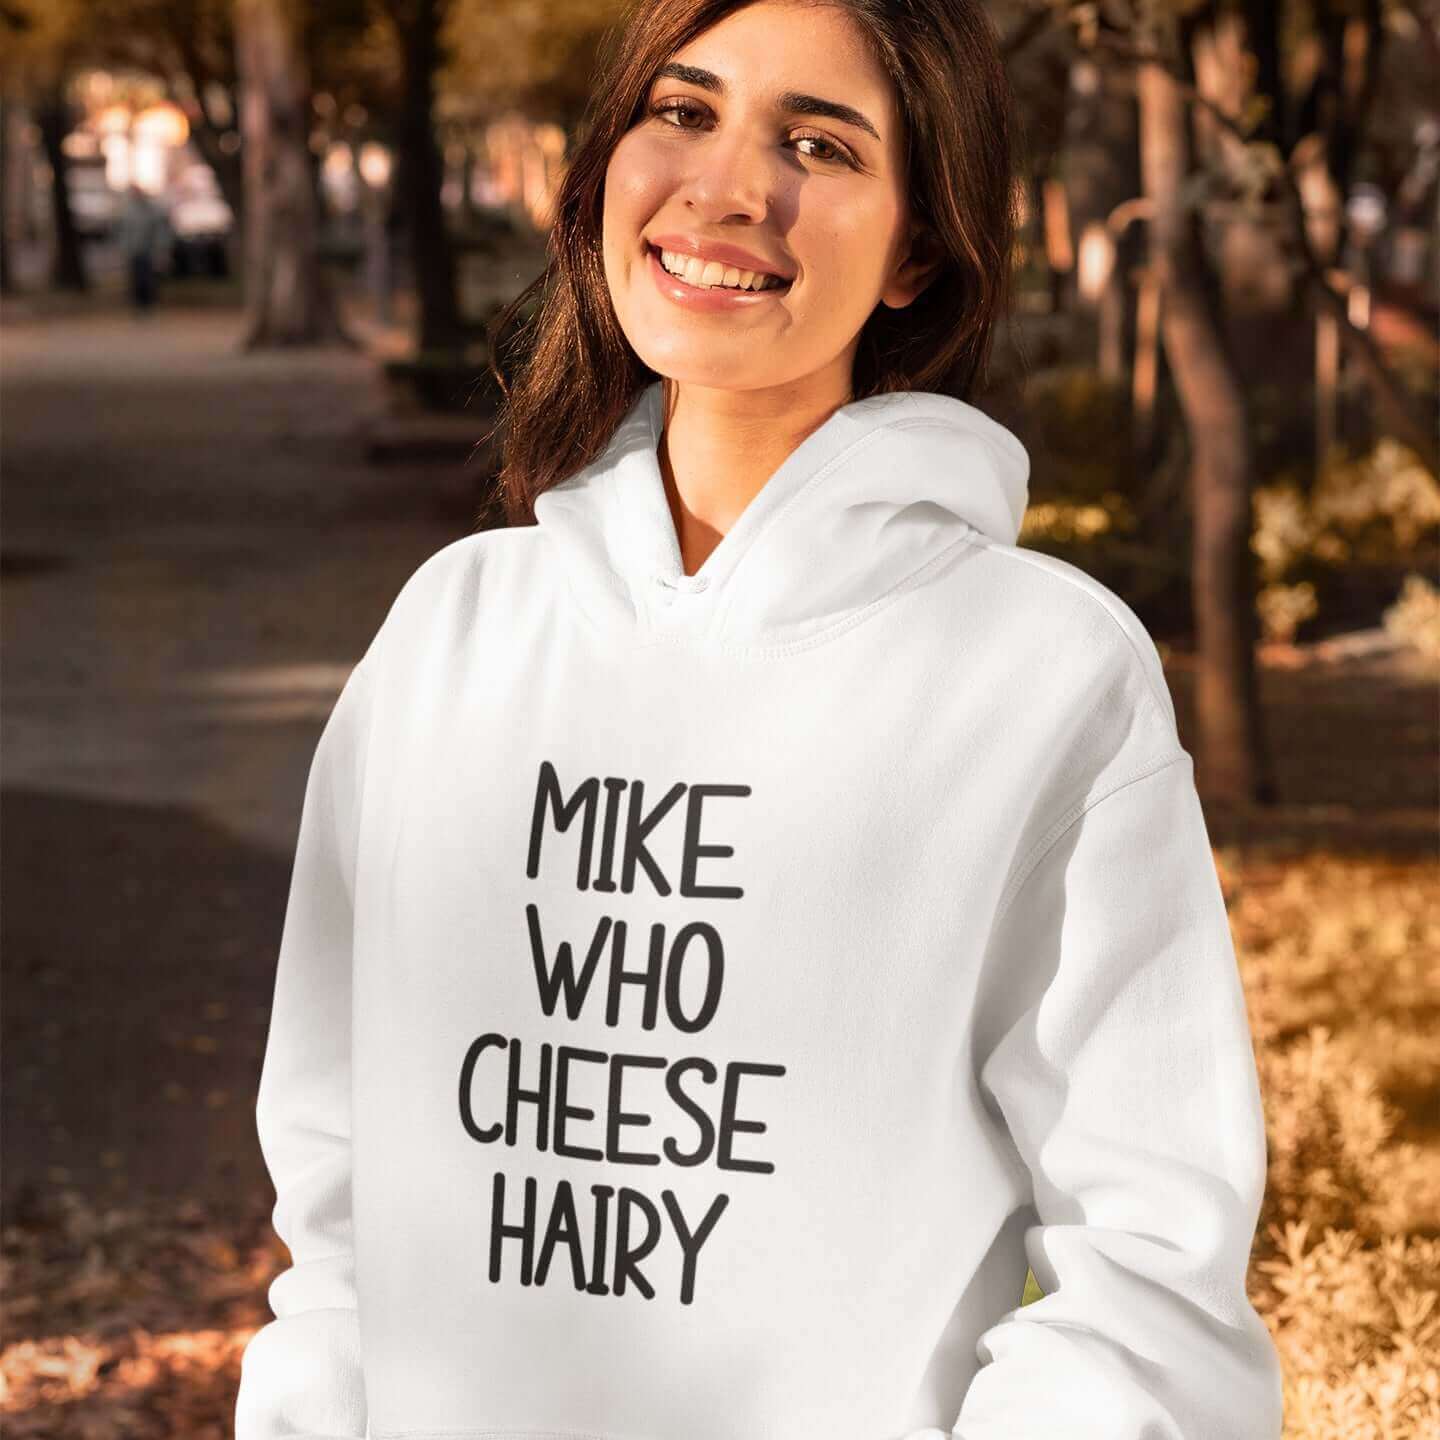 Grinning woman wearing white pun hoodie sweatshirt with the words Mike who cheese hairy printed on the front.